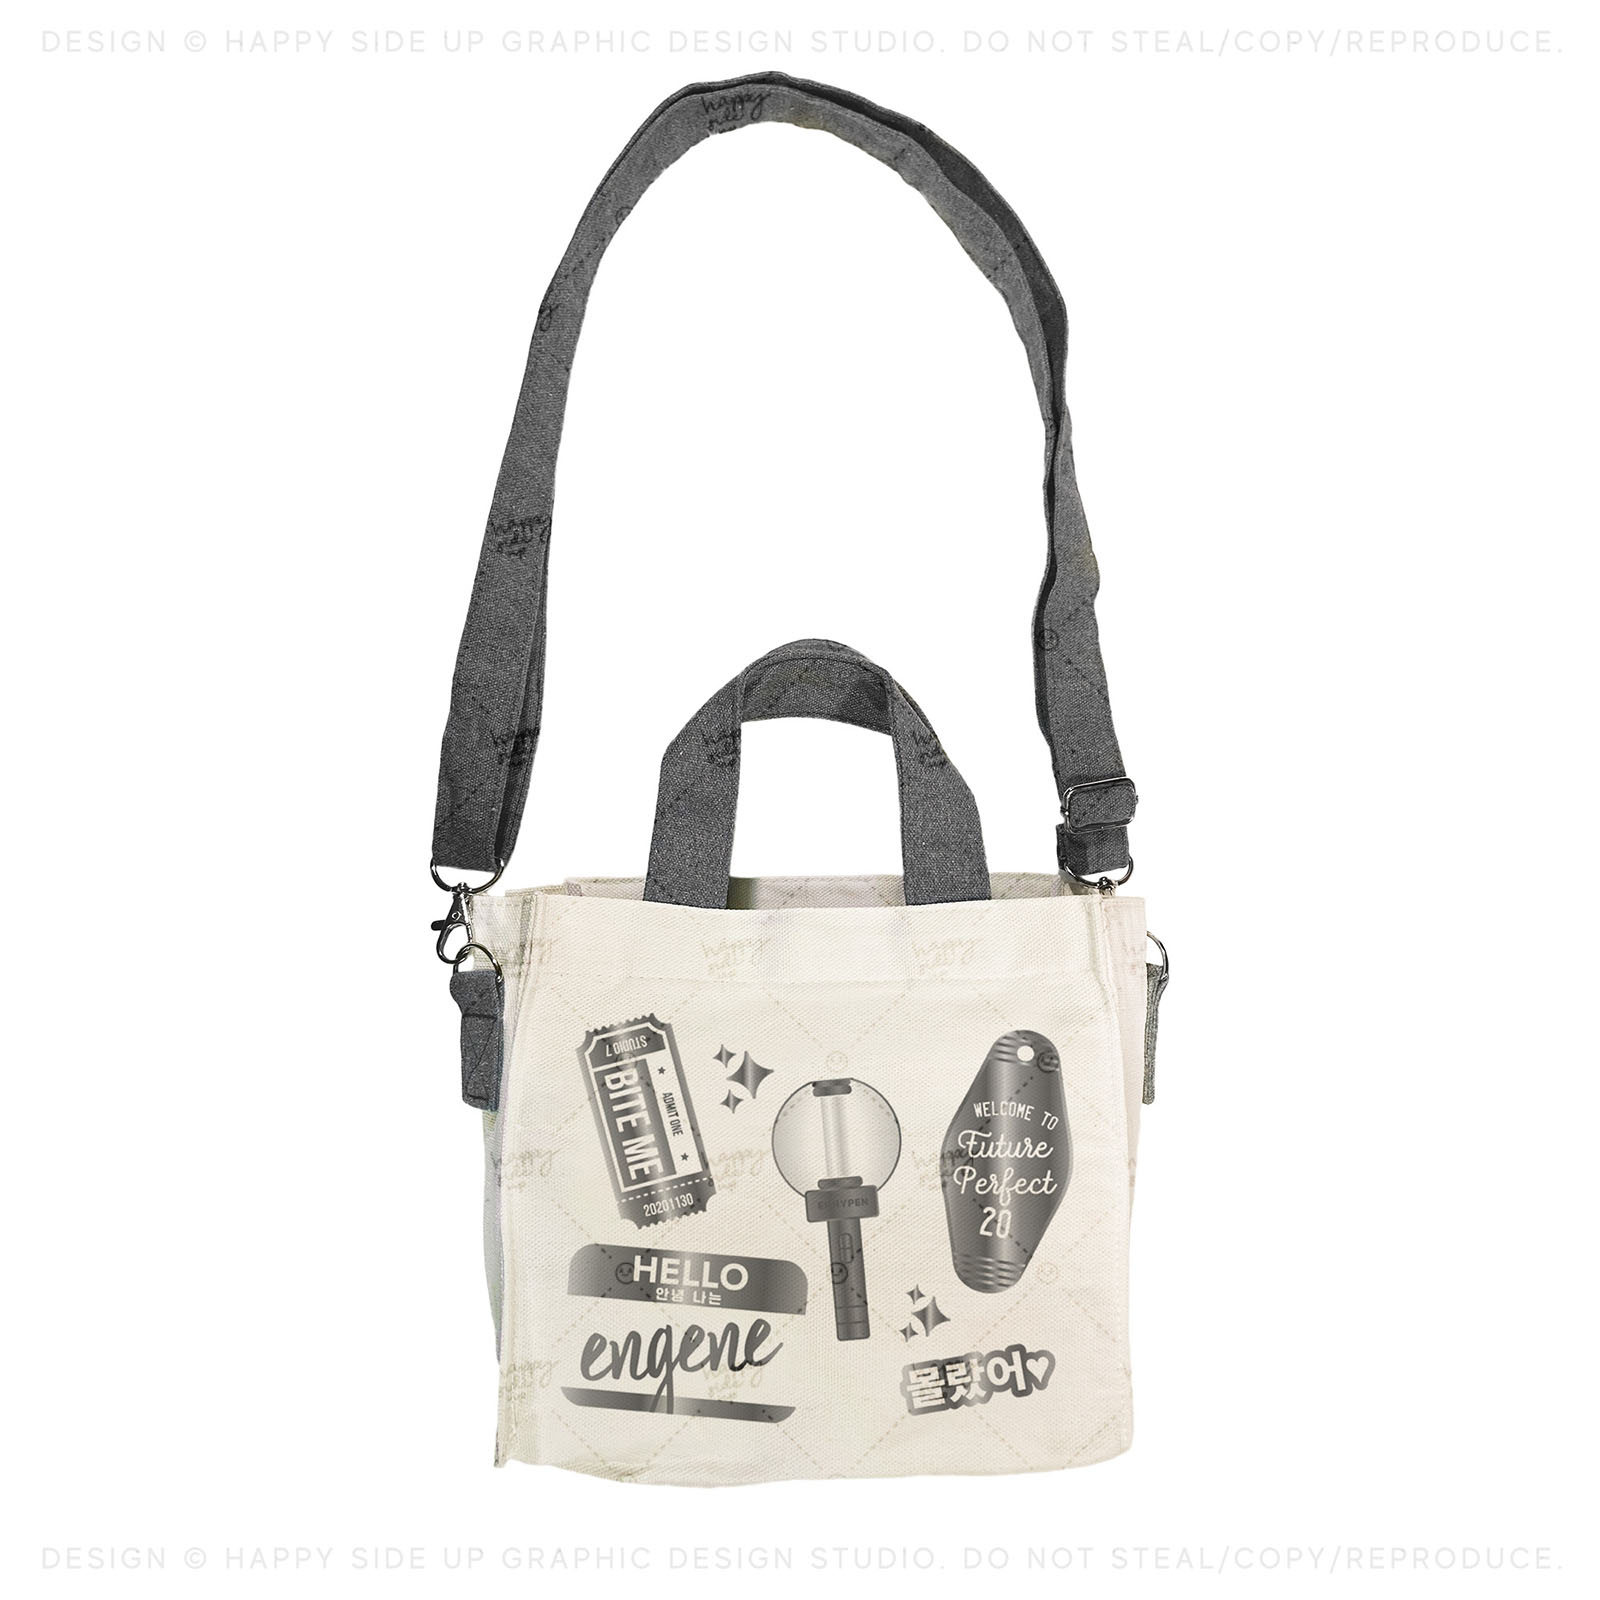 ENGENE Fandom Tote Bag - Happy Side Up - Phone cases, tote bags, and more